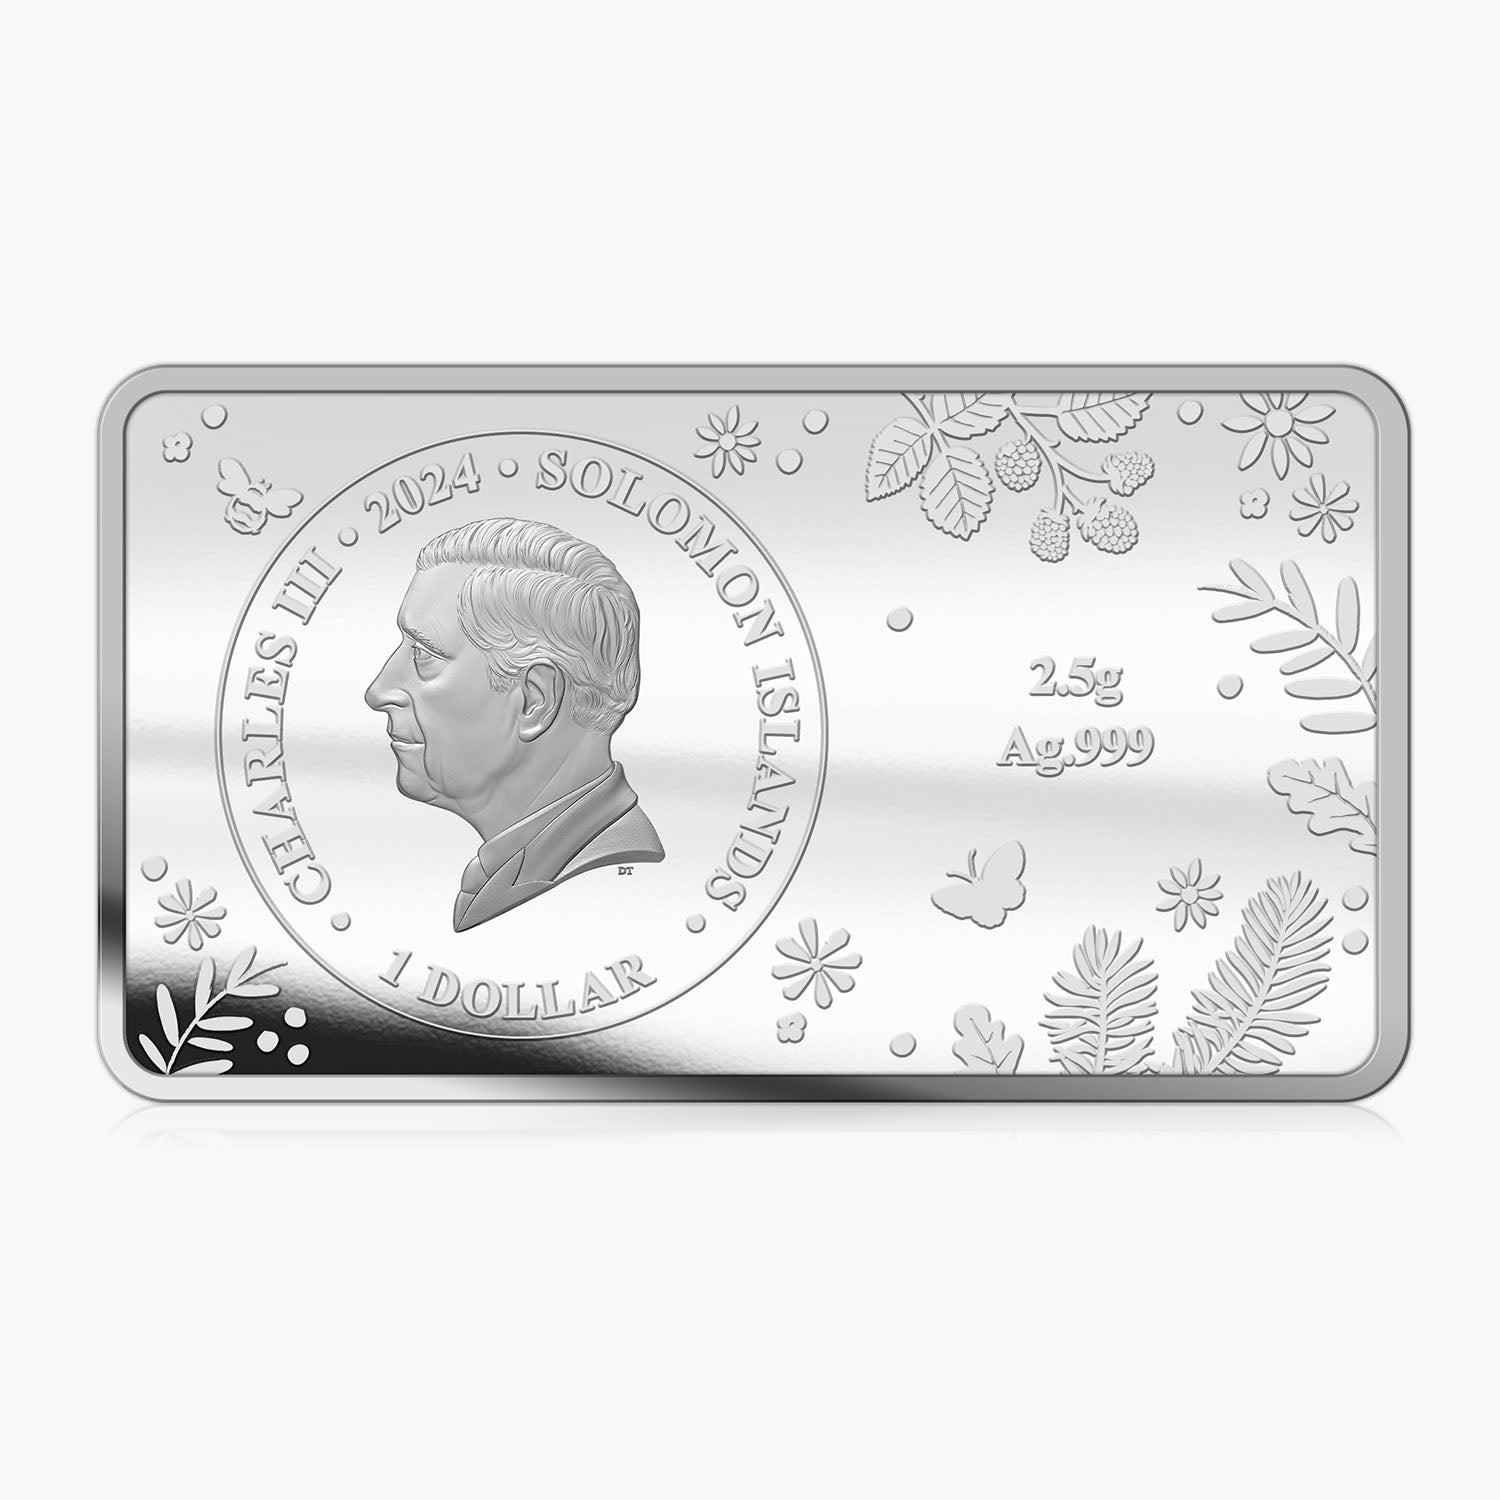 The World of Peter Rabbit Solid Silver Coin Bar Collection